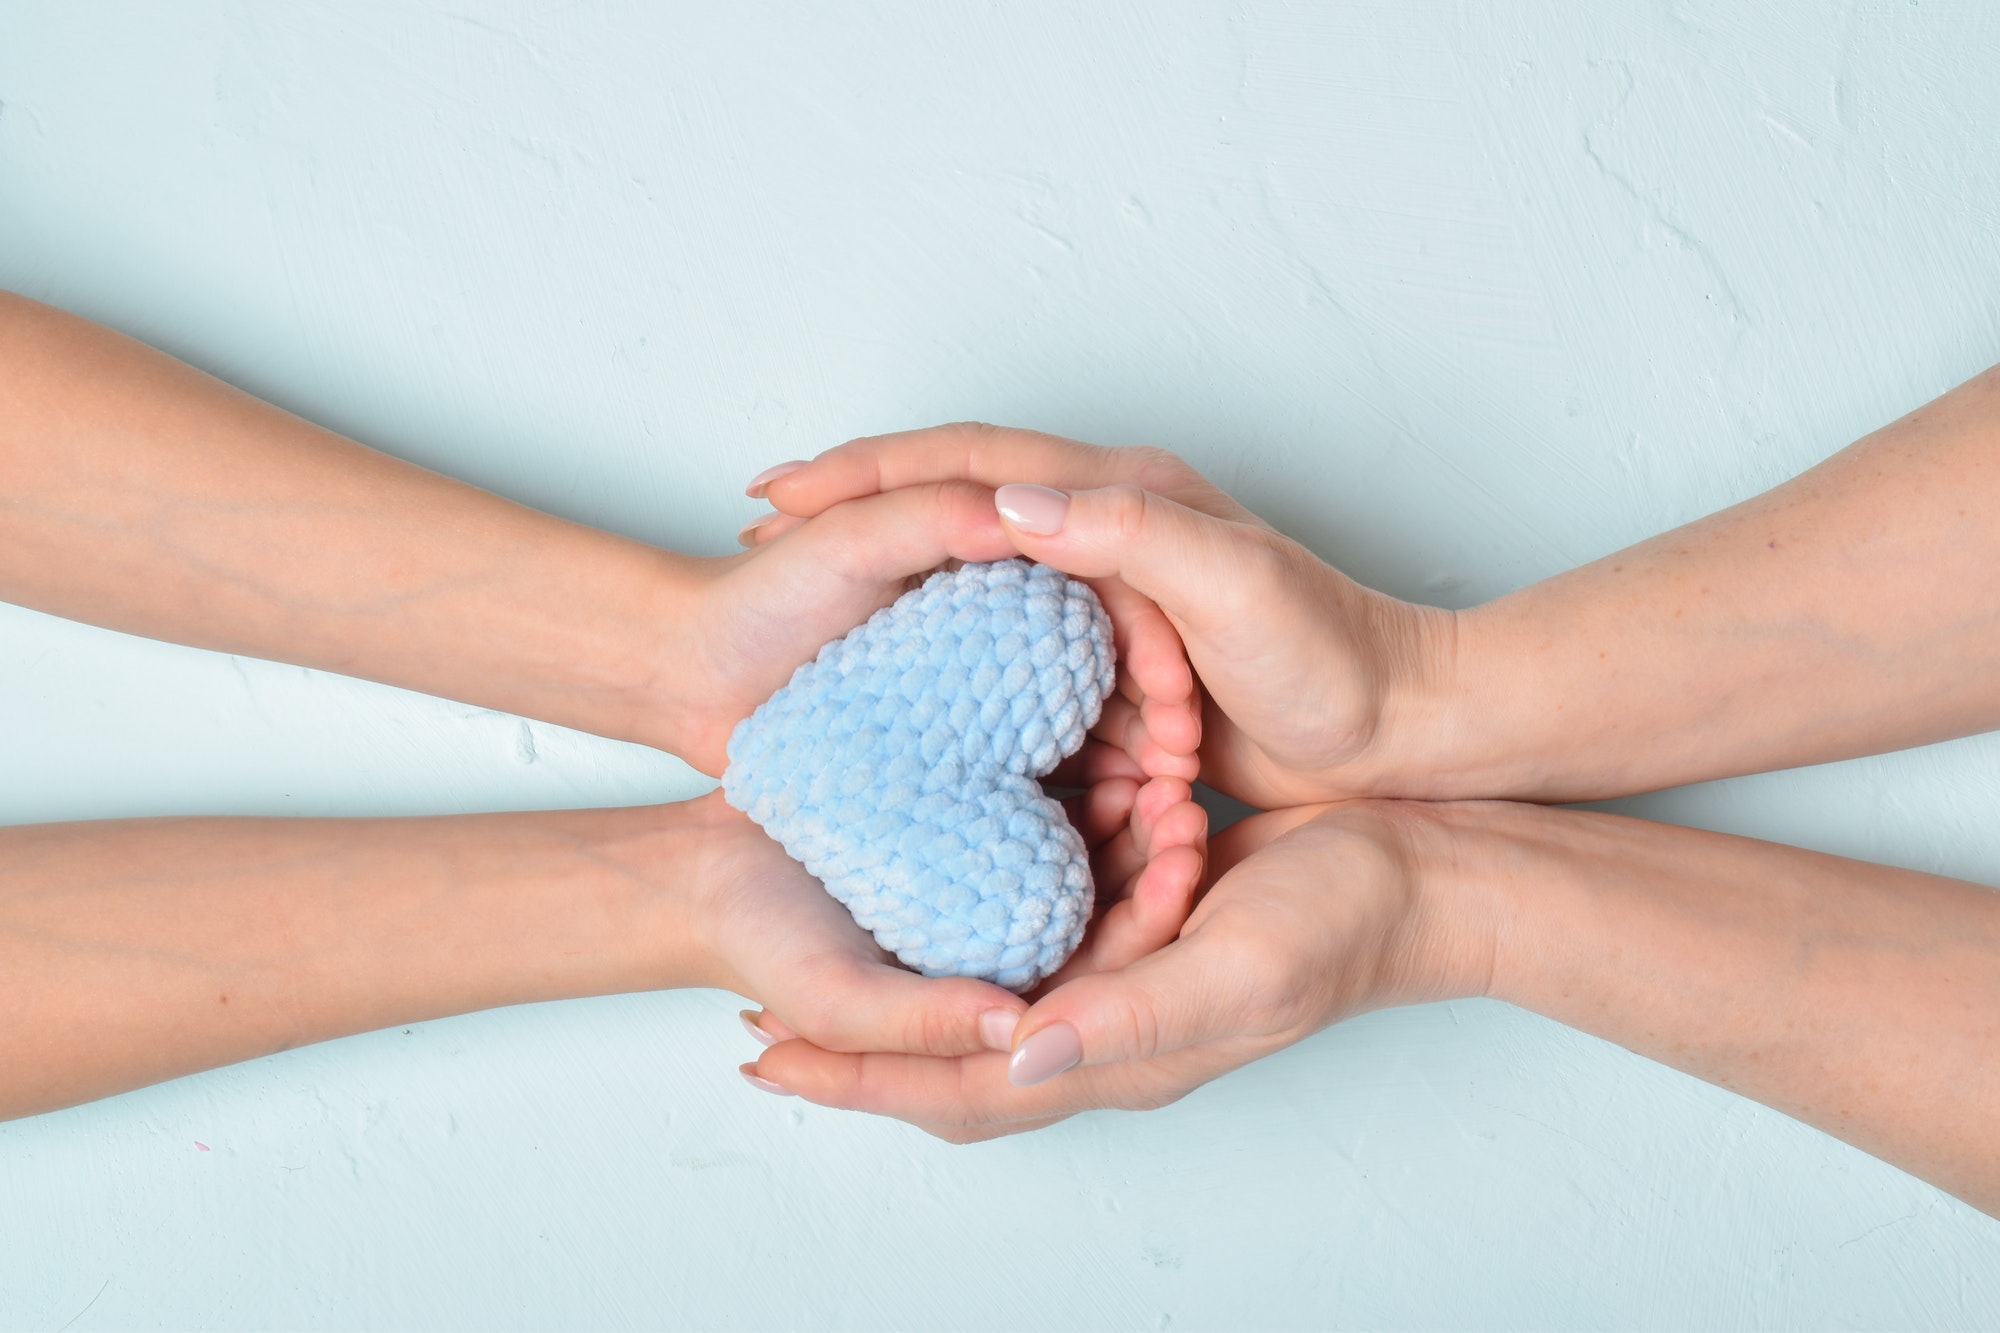 The baby passes the blue knitted heart into his mother's hands. Softness